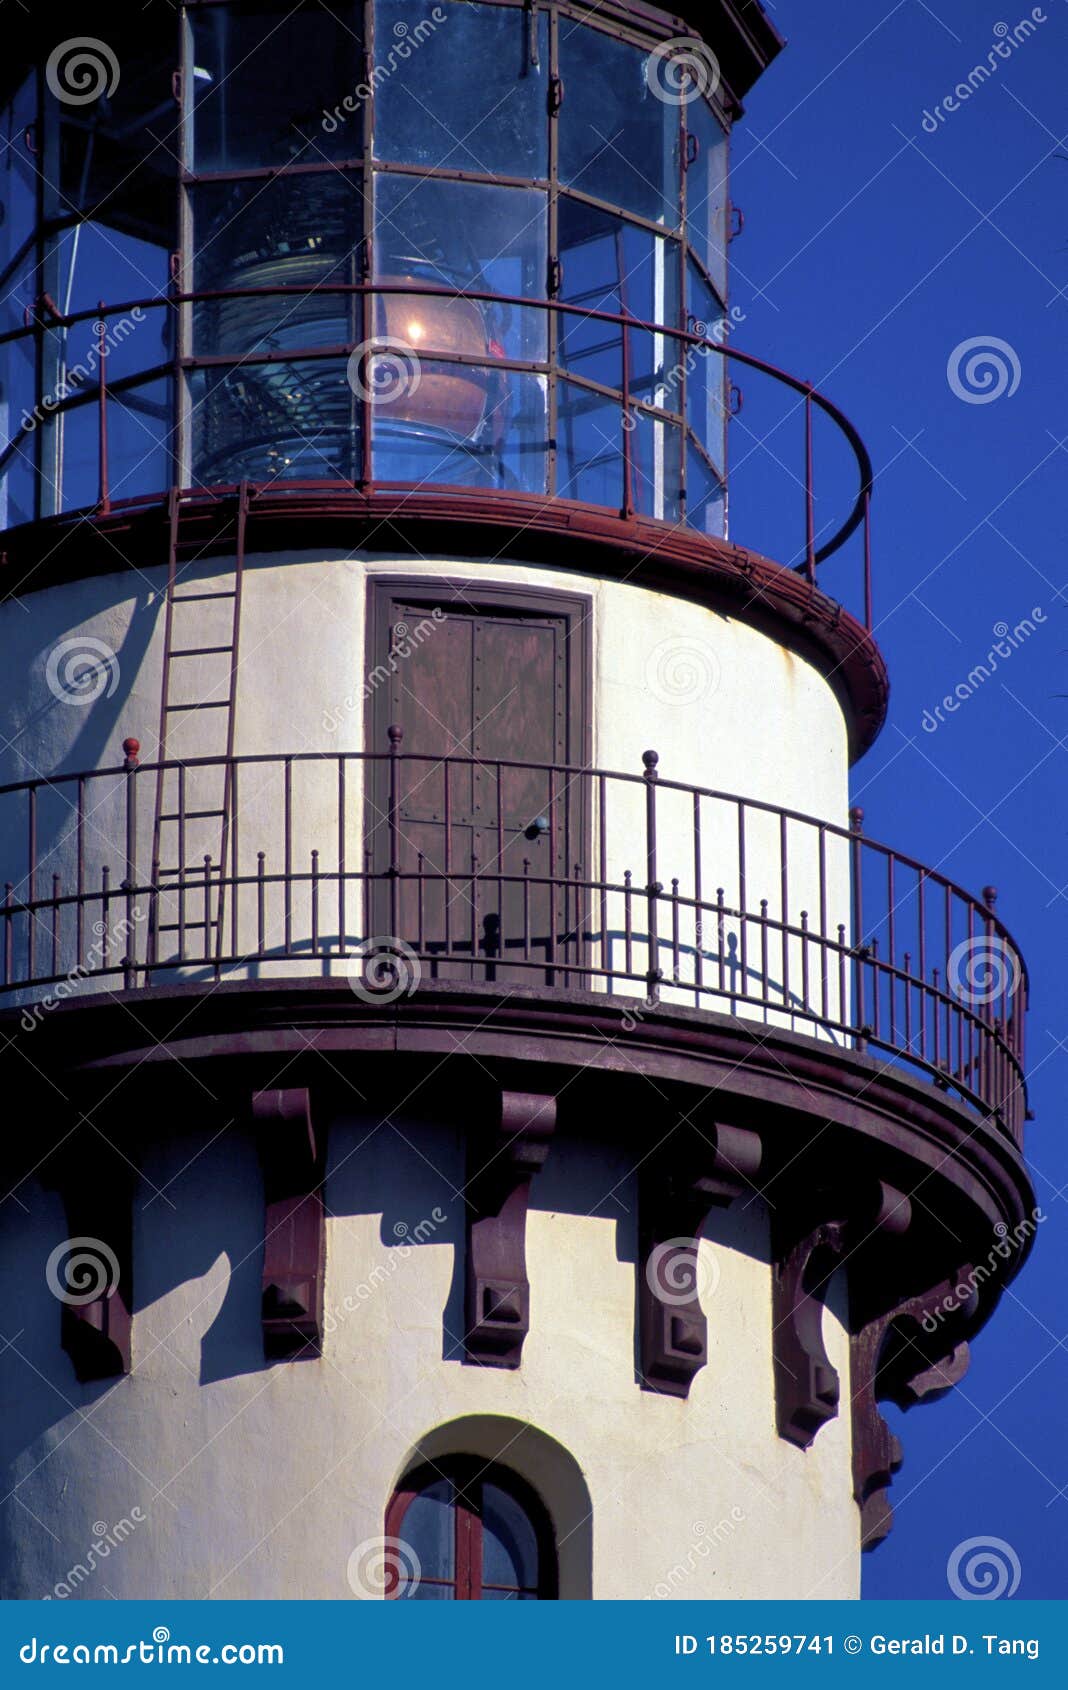 grosse point lighthouse   43743